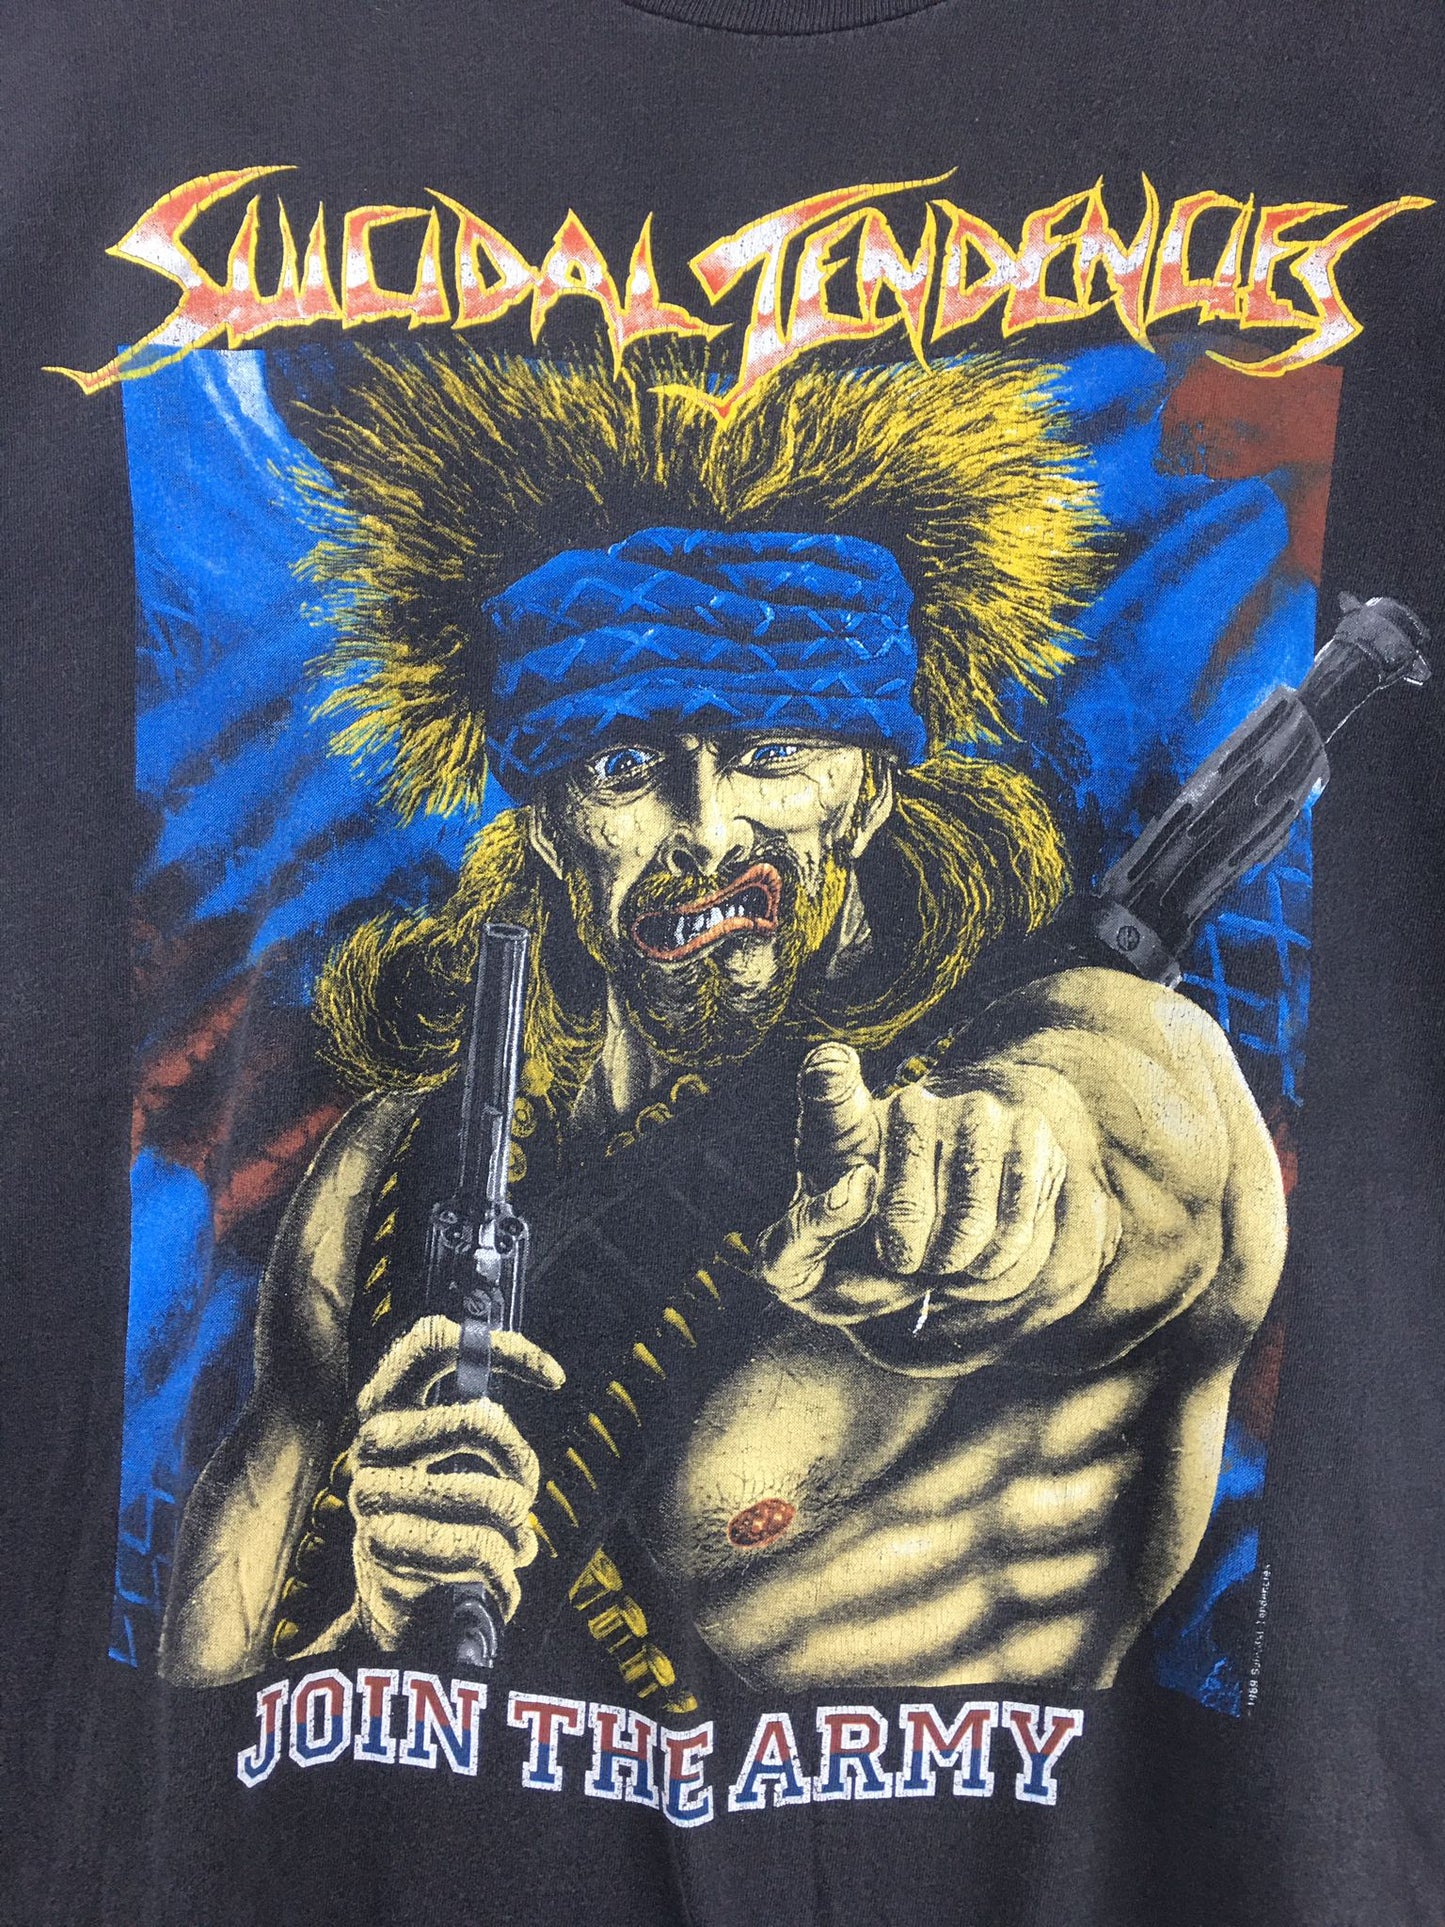 Vintage Suicidal Tendencies "Join The Army 1987